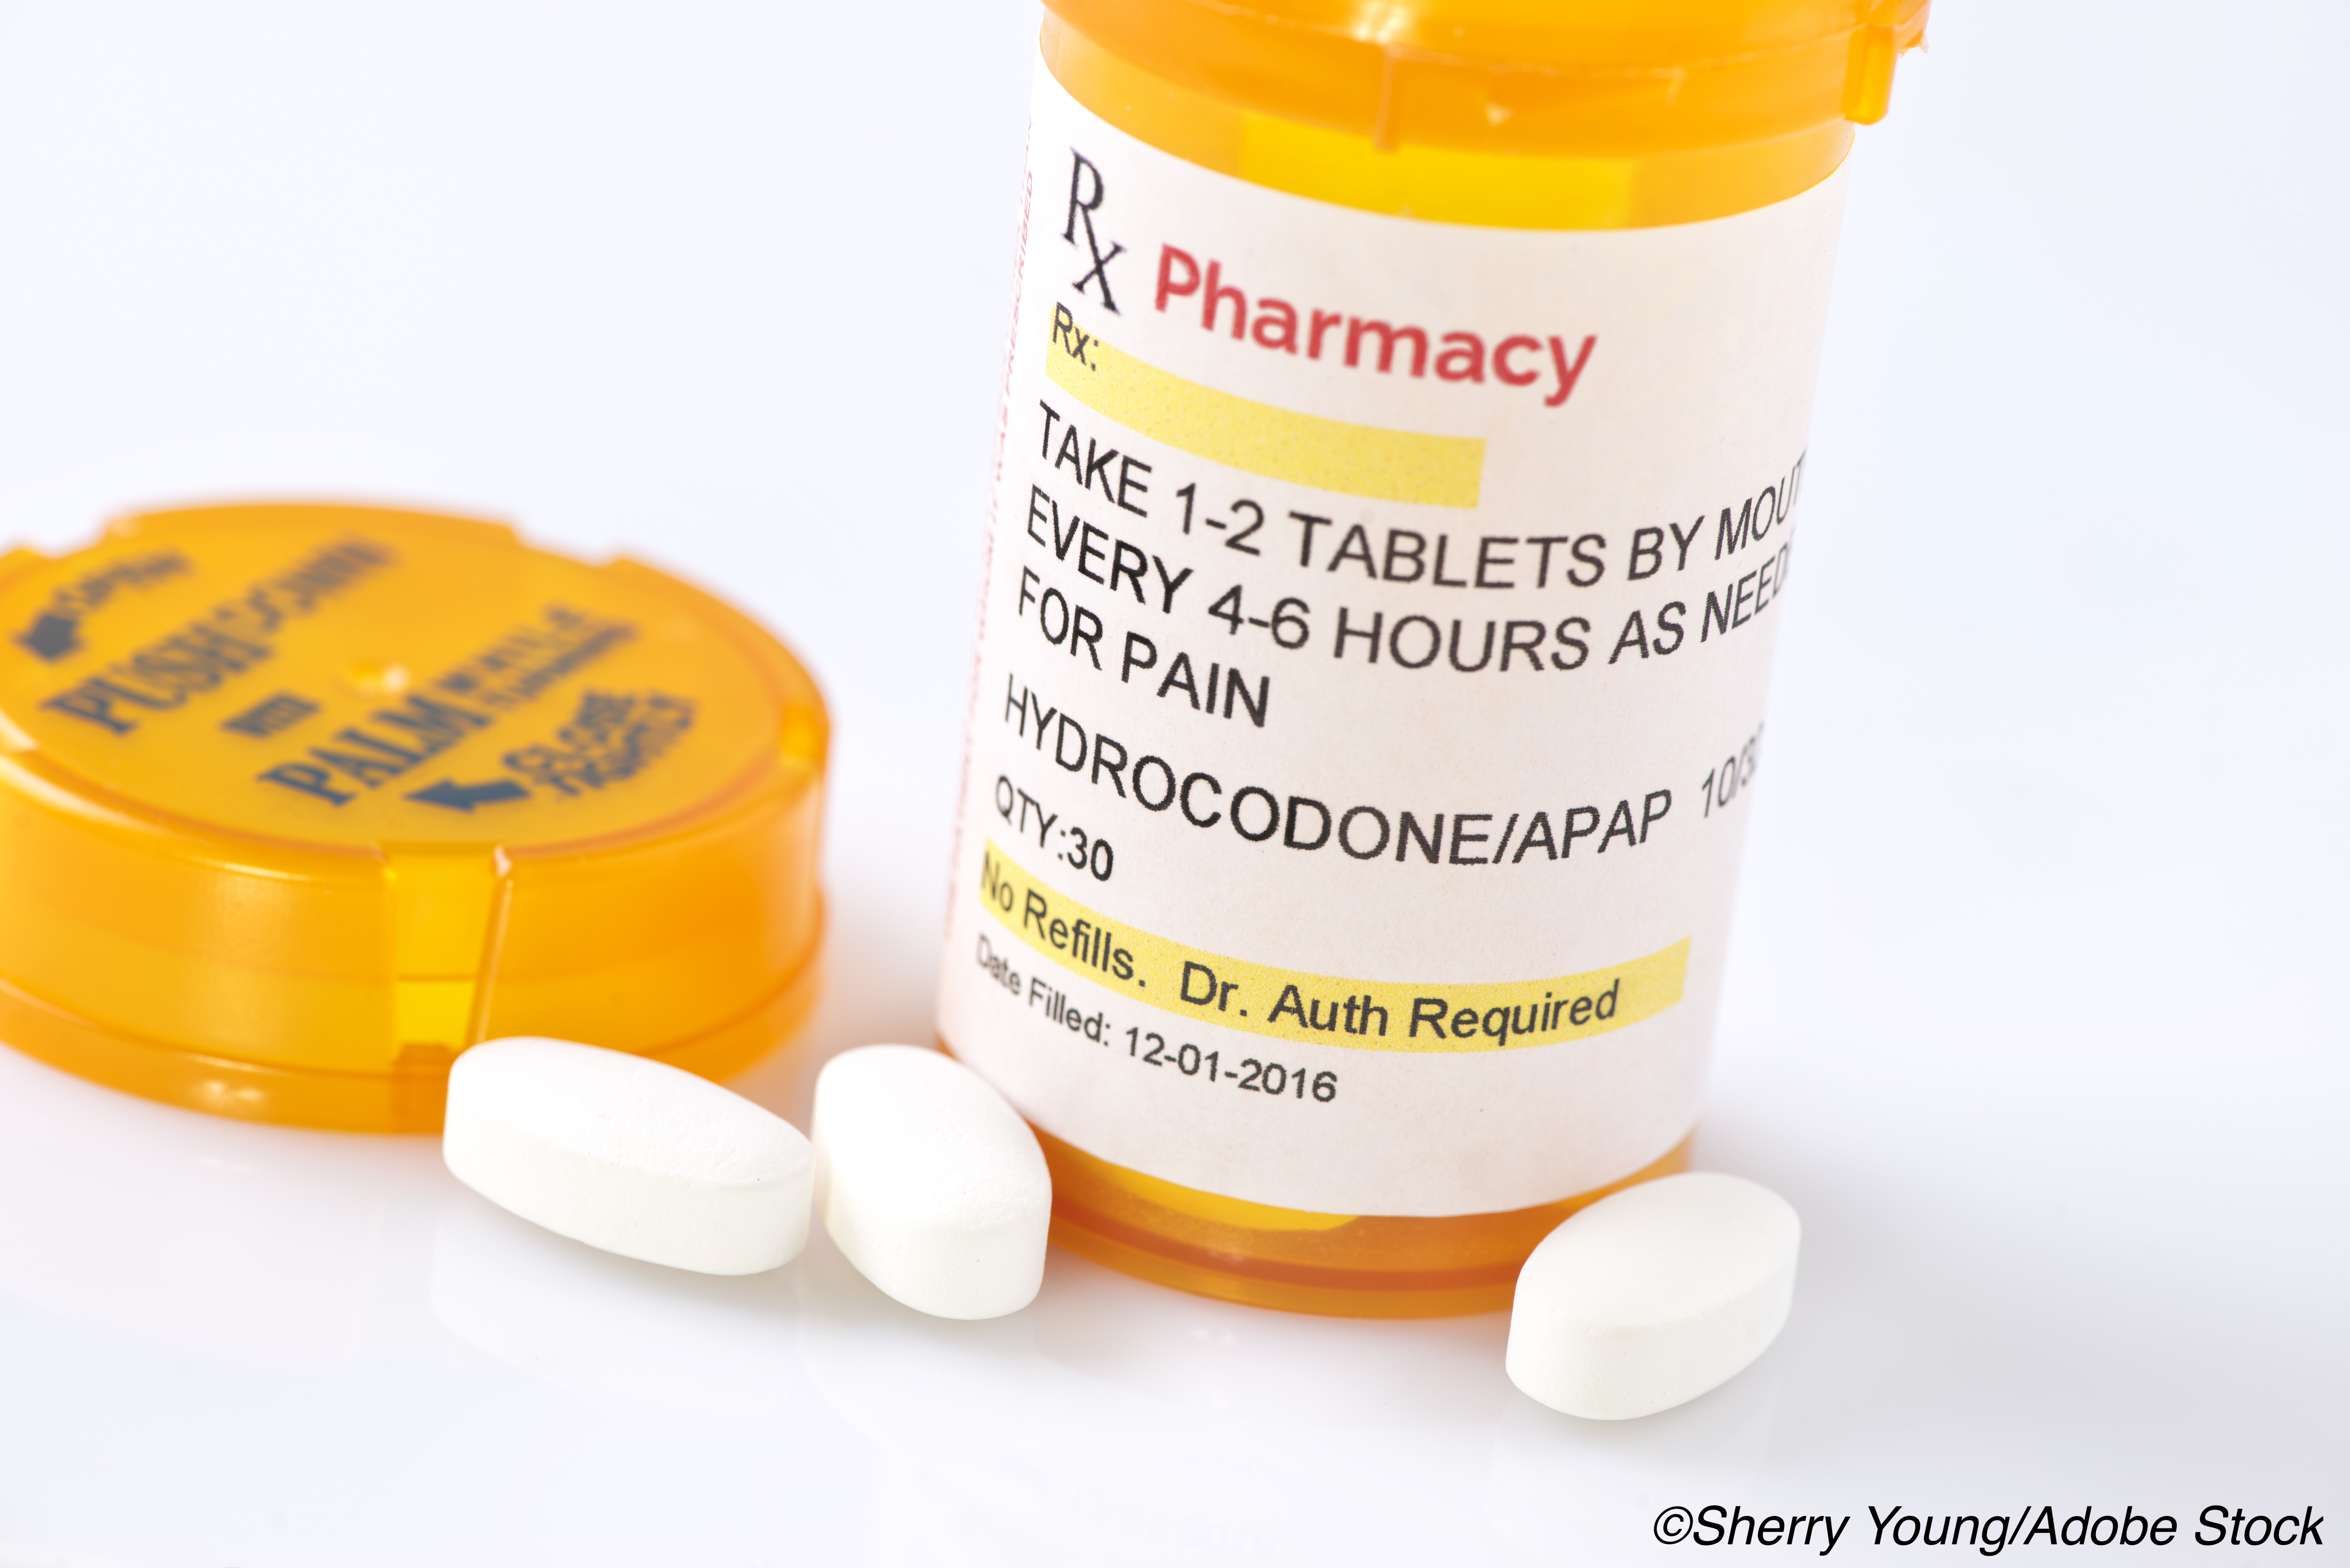 For Two Decades, the FDA Approved Opioids Based on Scant Evidence